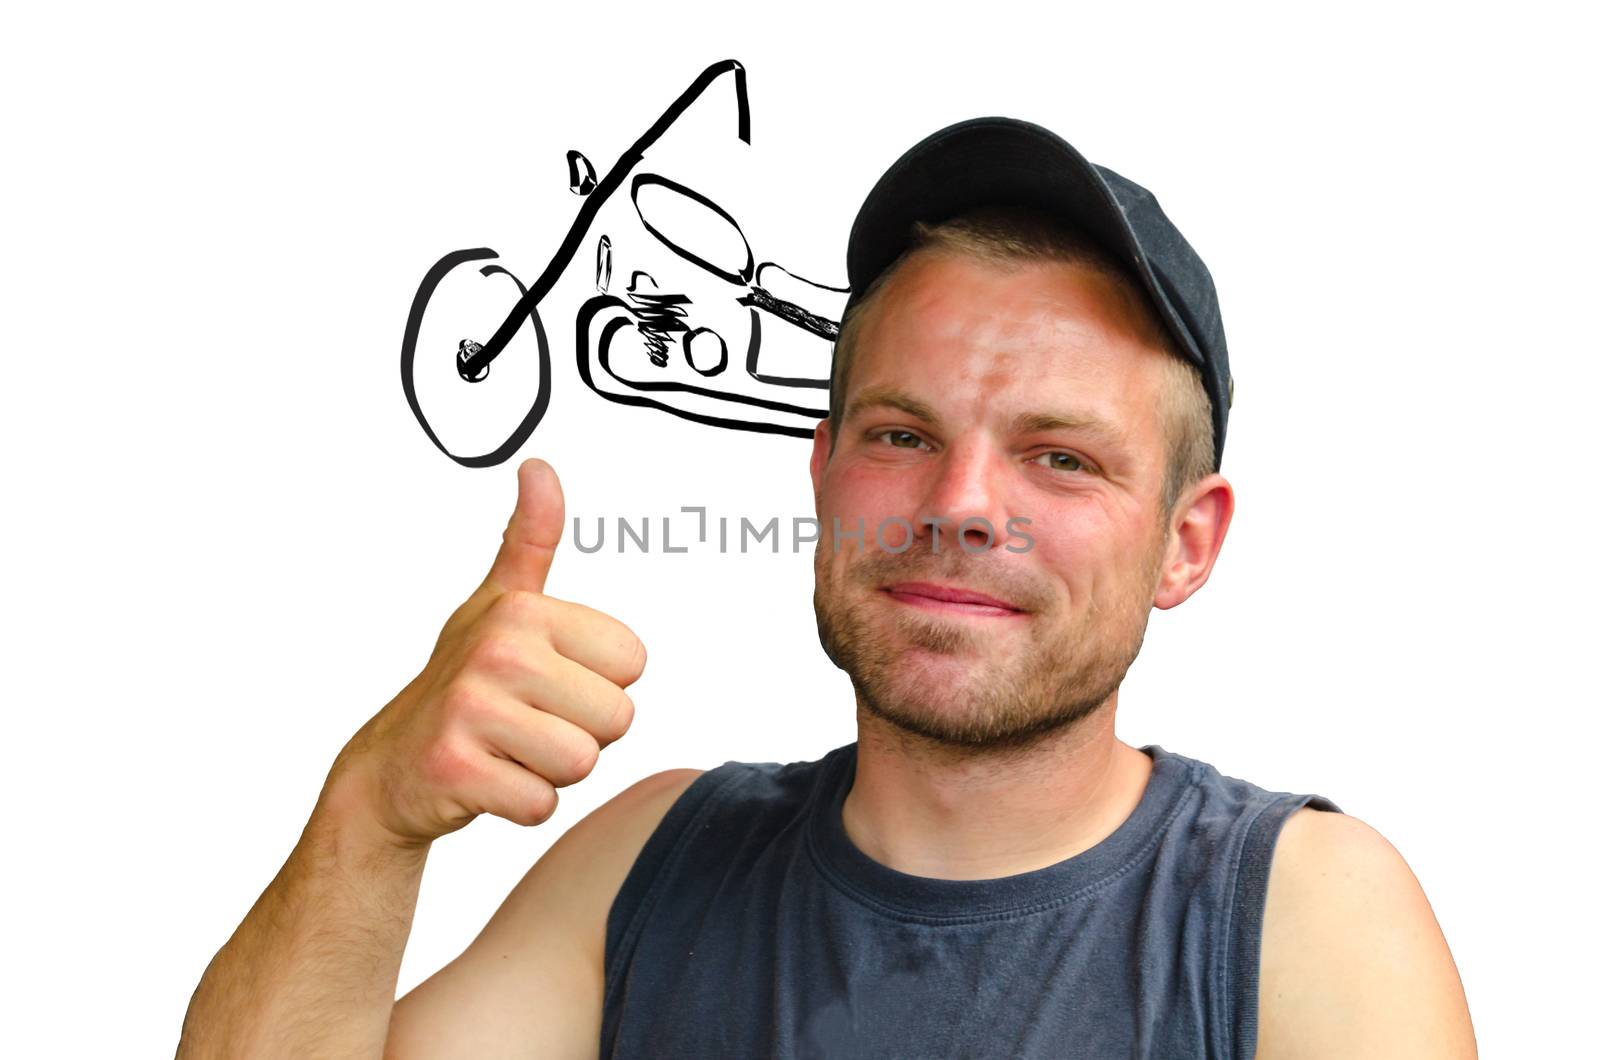 Young man with cap showing thumbs up symbol in Hintergurnd a motorcycle chopper